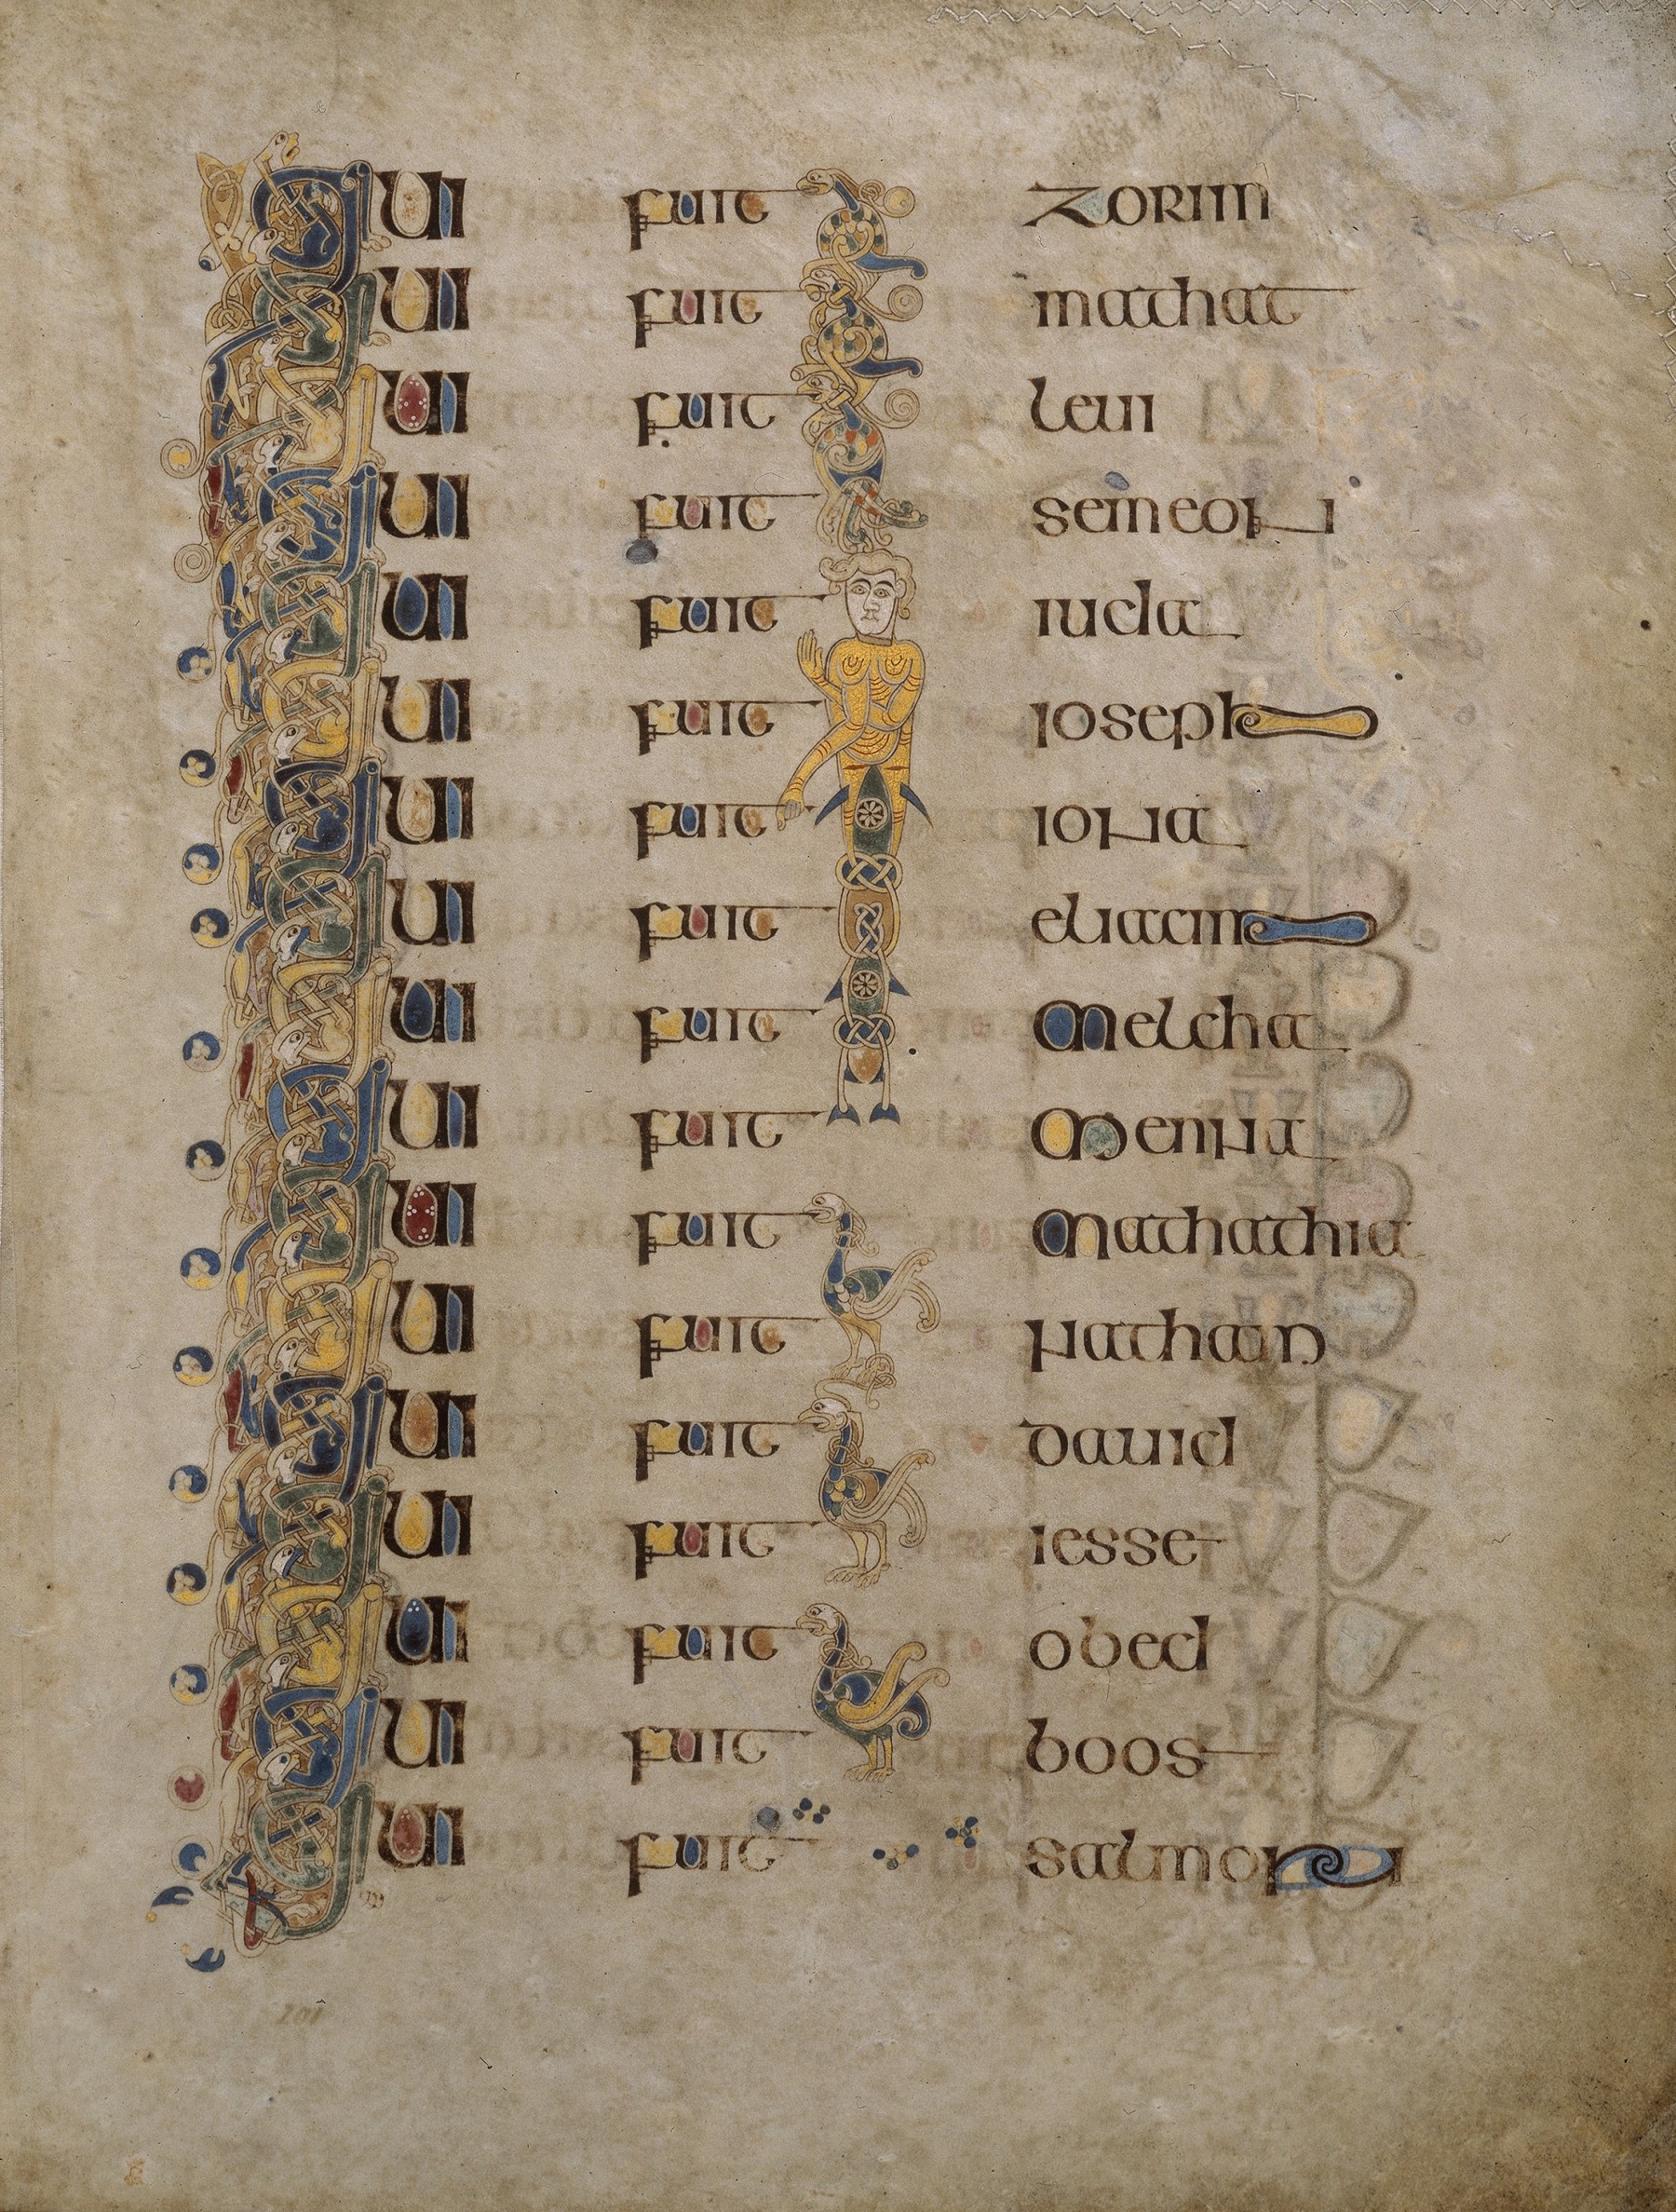 Page with ancient inscribes from the Book of Kells